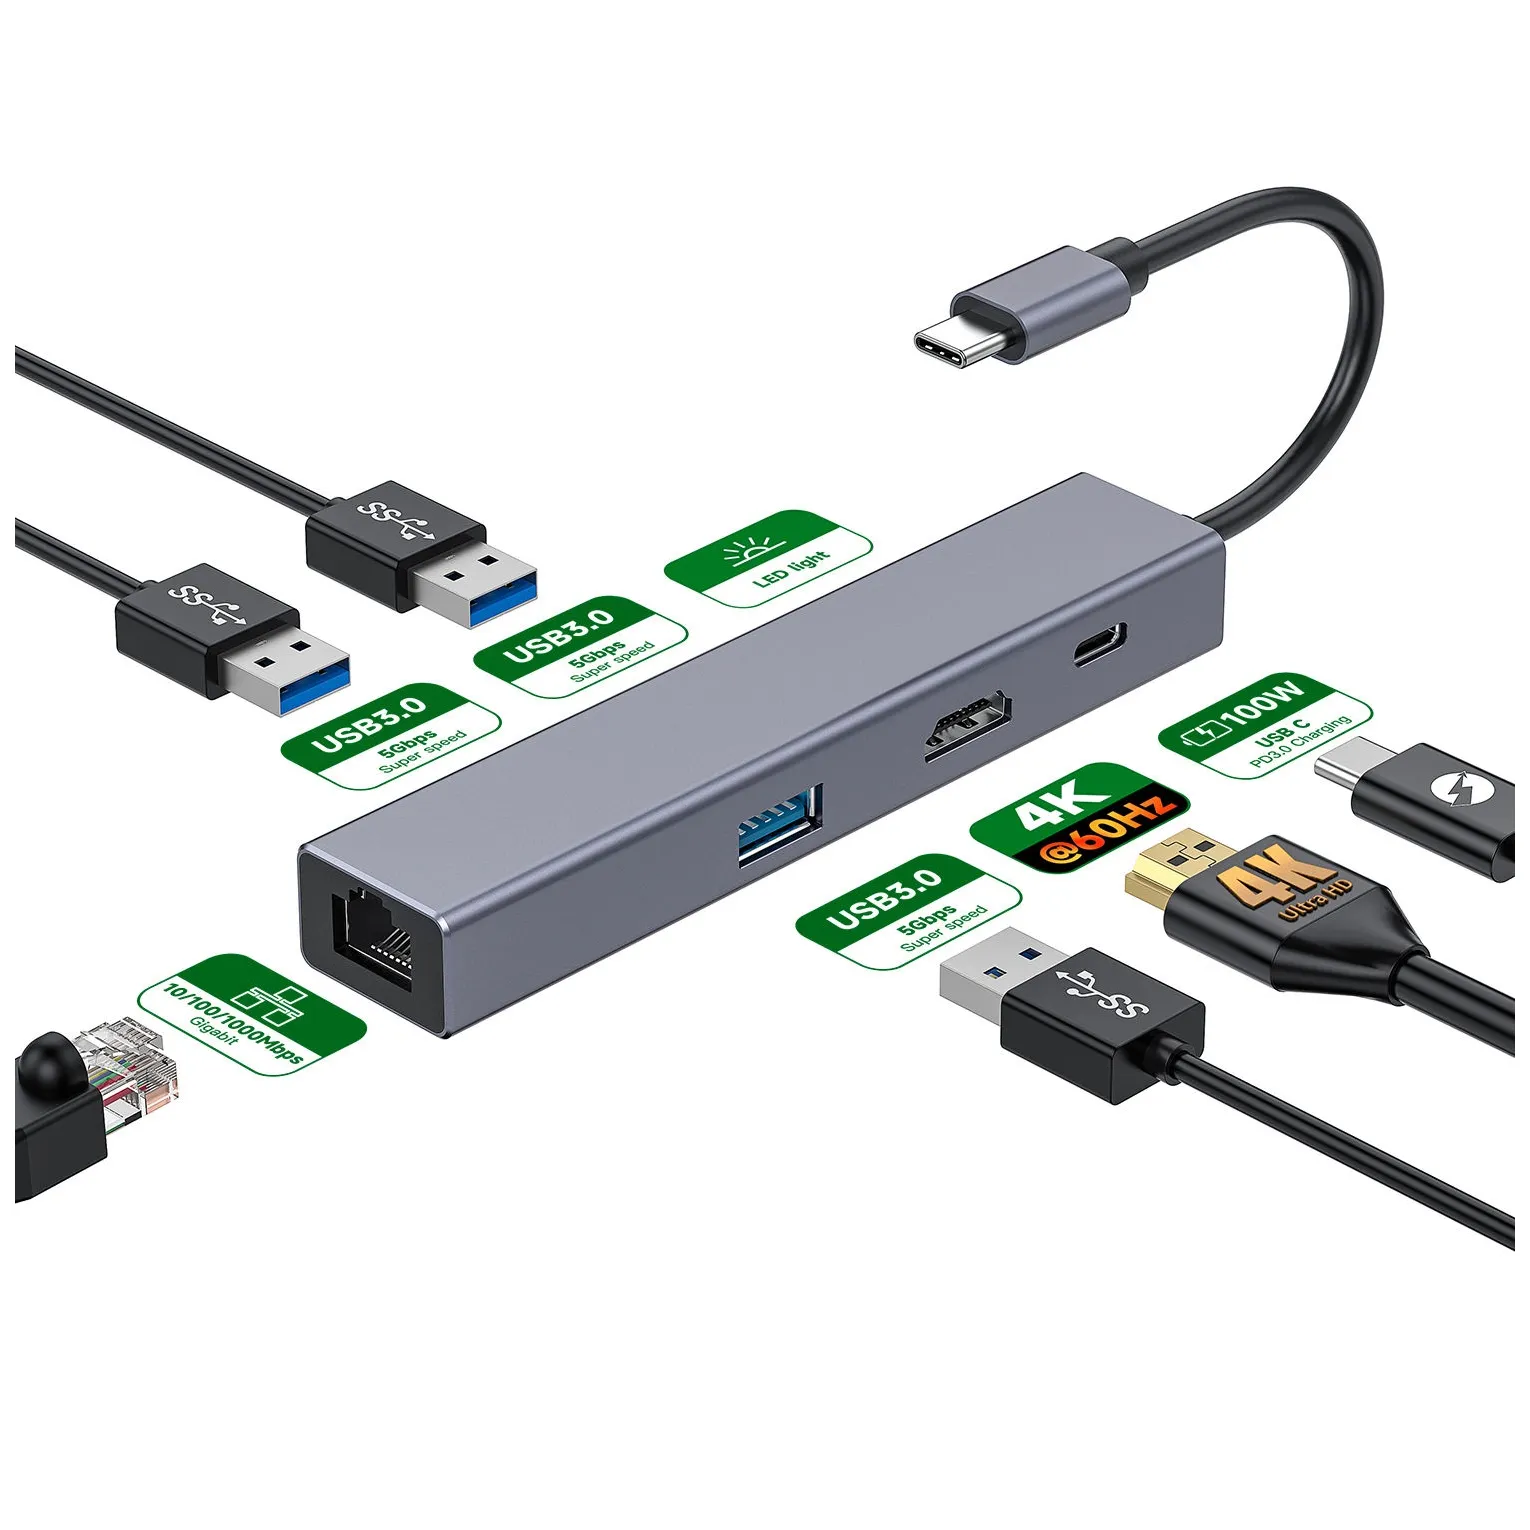 Factory Supply Usb-C To 3.1 Converter Expand Laptop'S Connectivity Docking Station HDR 1000Mbps RJ45 3.0 USB Hub 100W PD